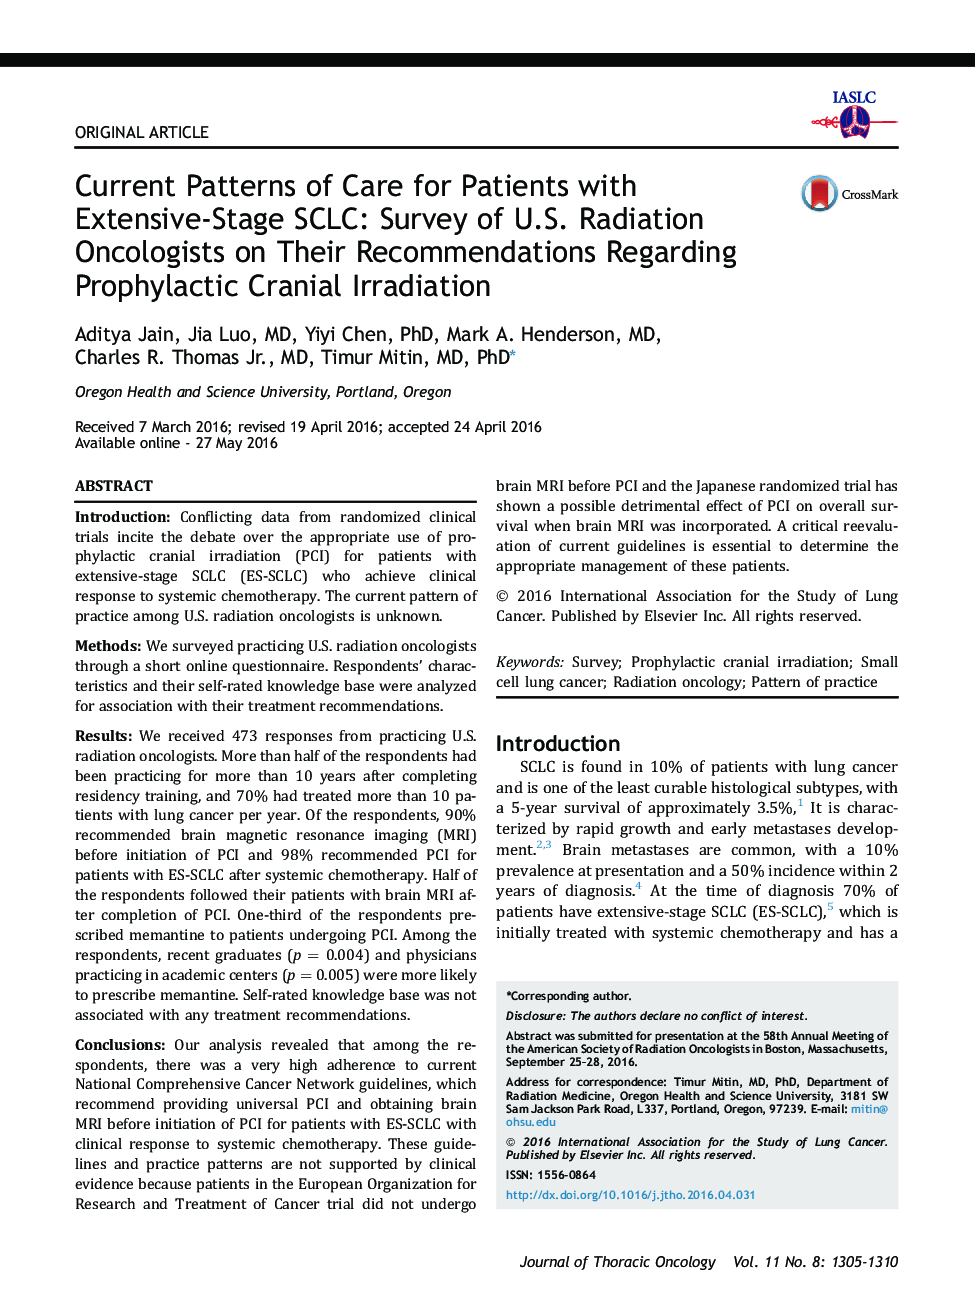 Current Patterns of Care for Patients with Extensive-Stage SCLC: Survey of U.S. Radiation Oncologists on Their Recommendations Regarding Prophylactic Cranial Irradiation